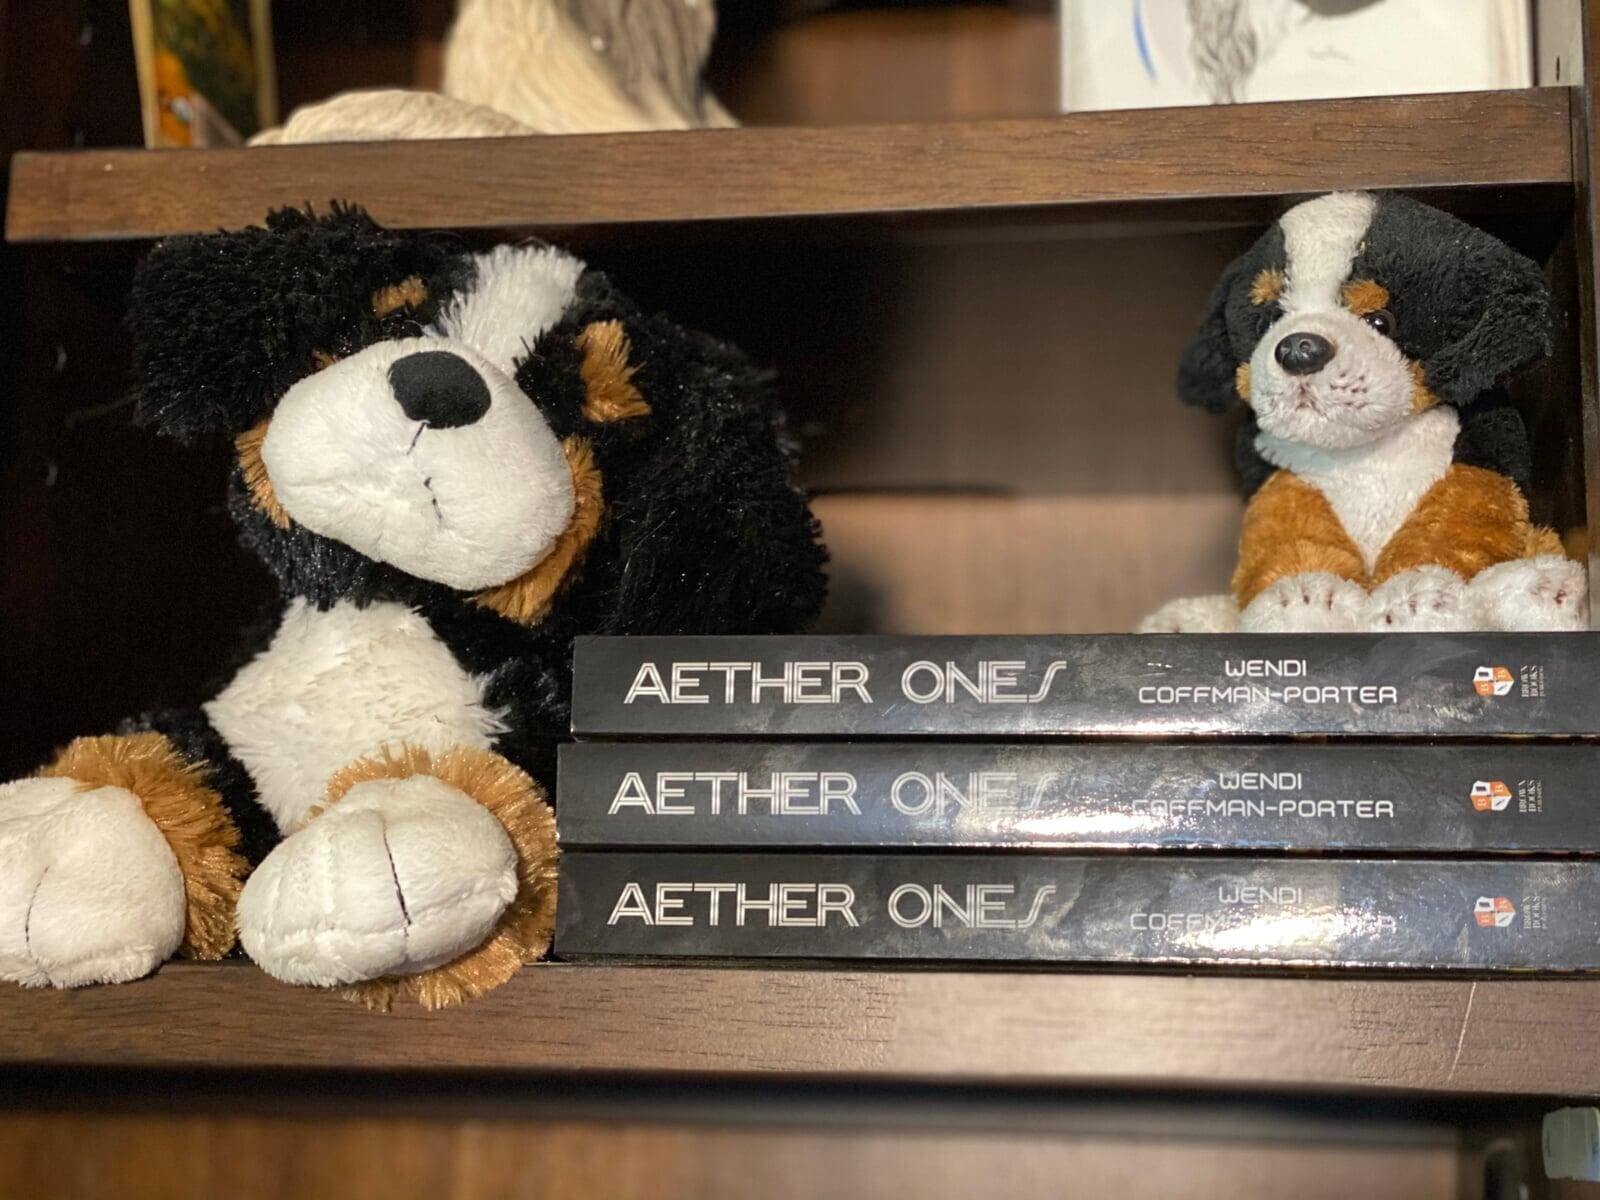 Two Berner toys next to a stack of books with the title Aether Ones